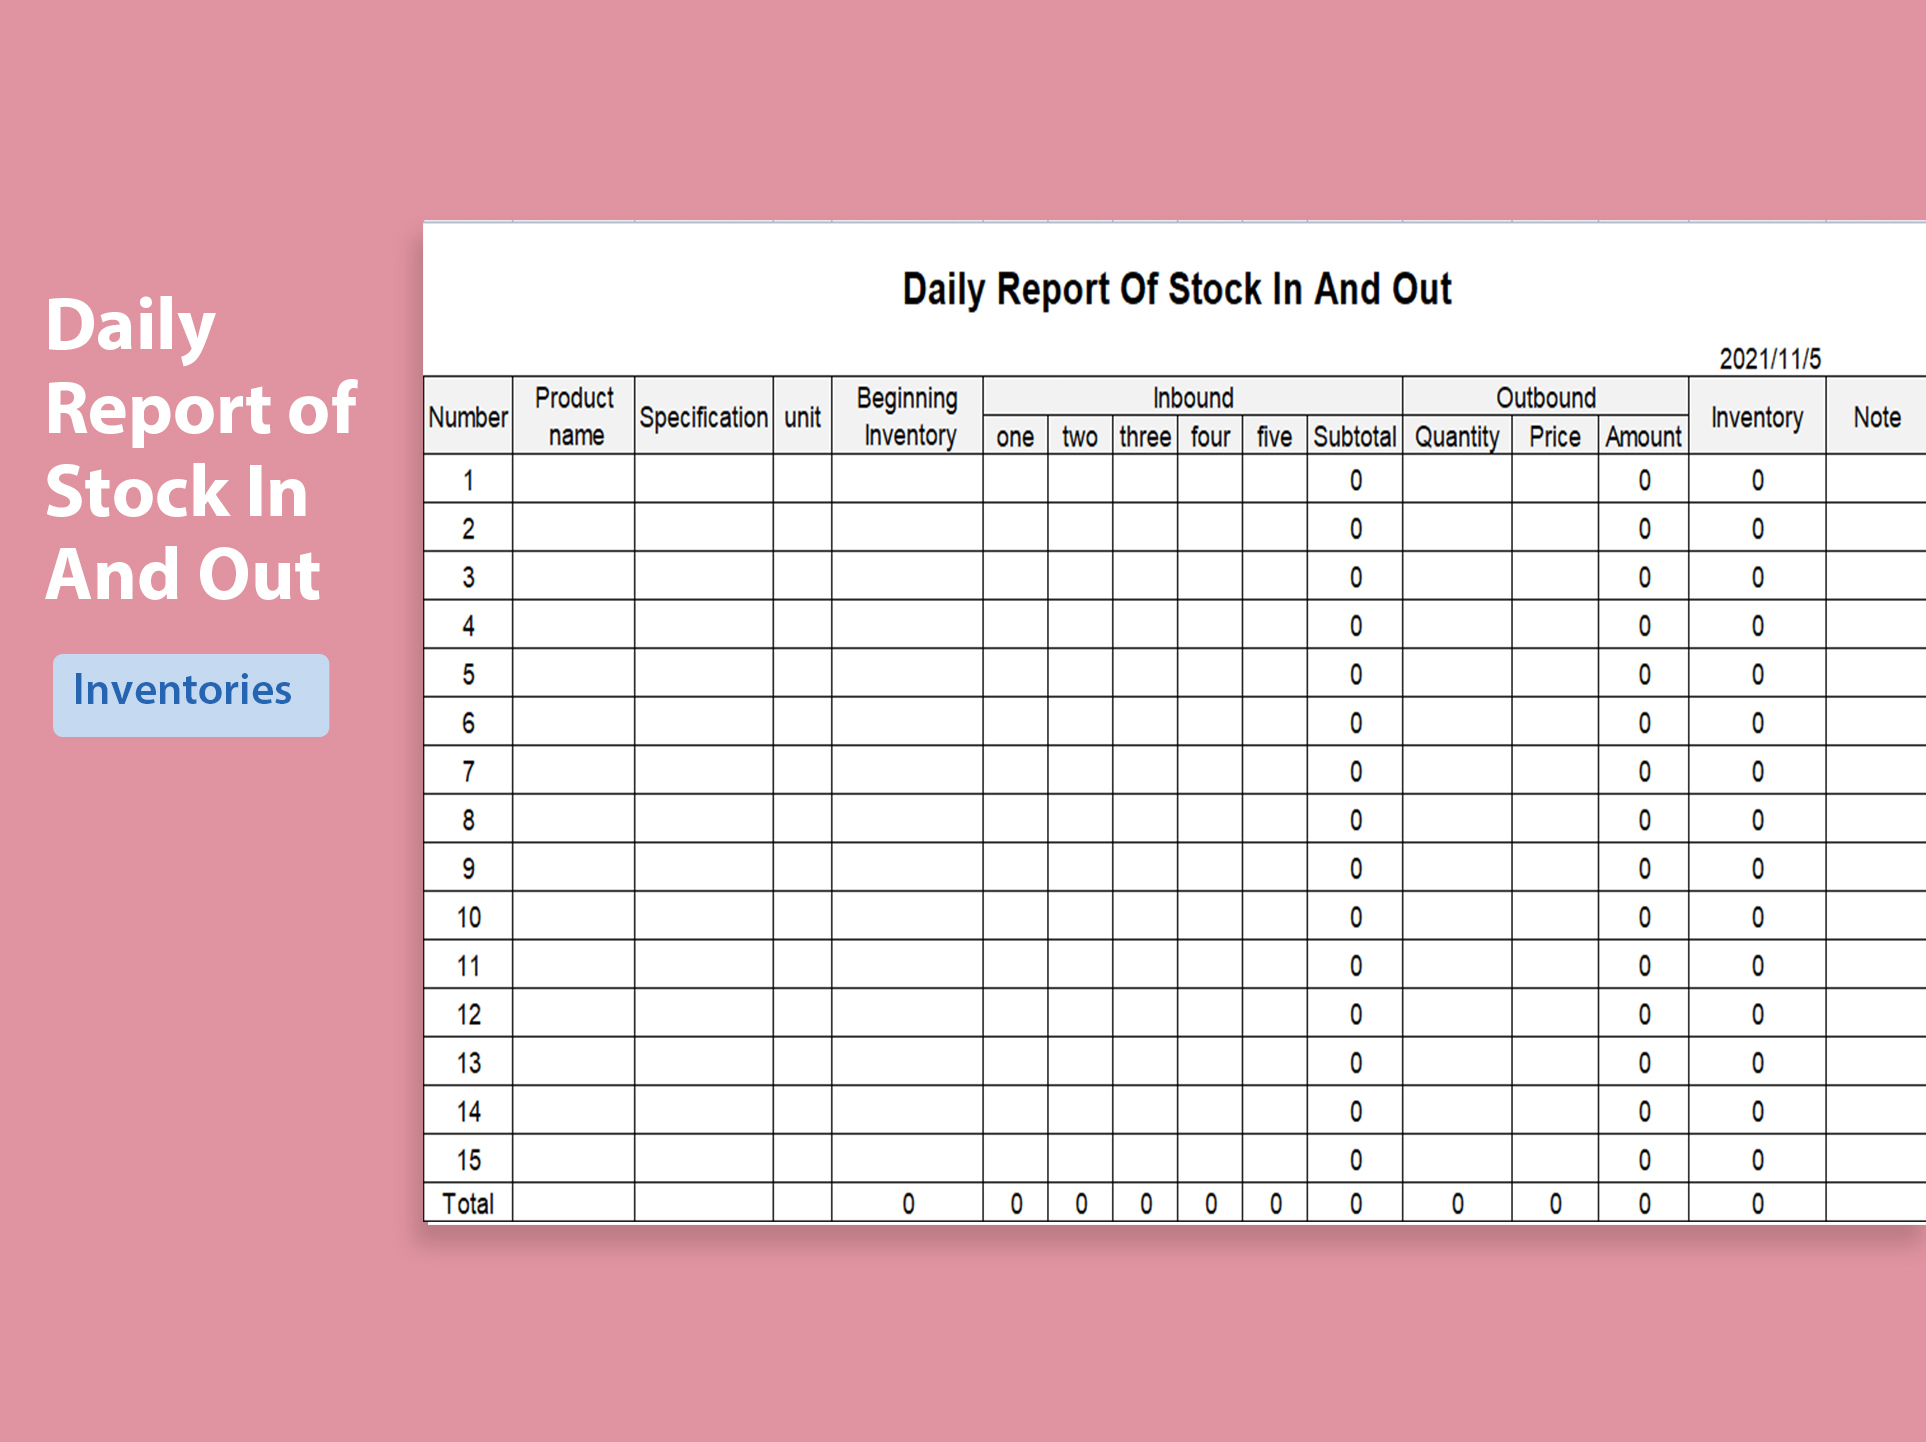 EXCEL of Daily Report of Stock in and out